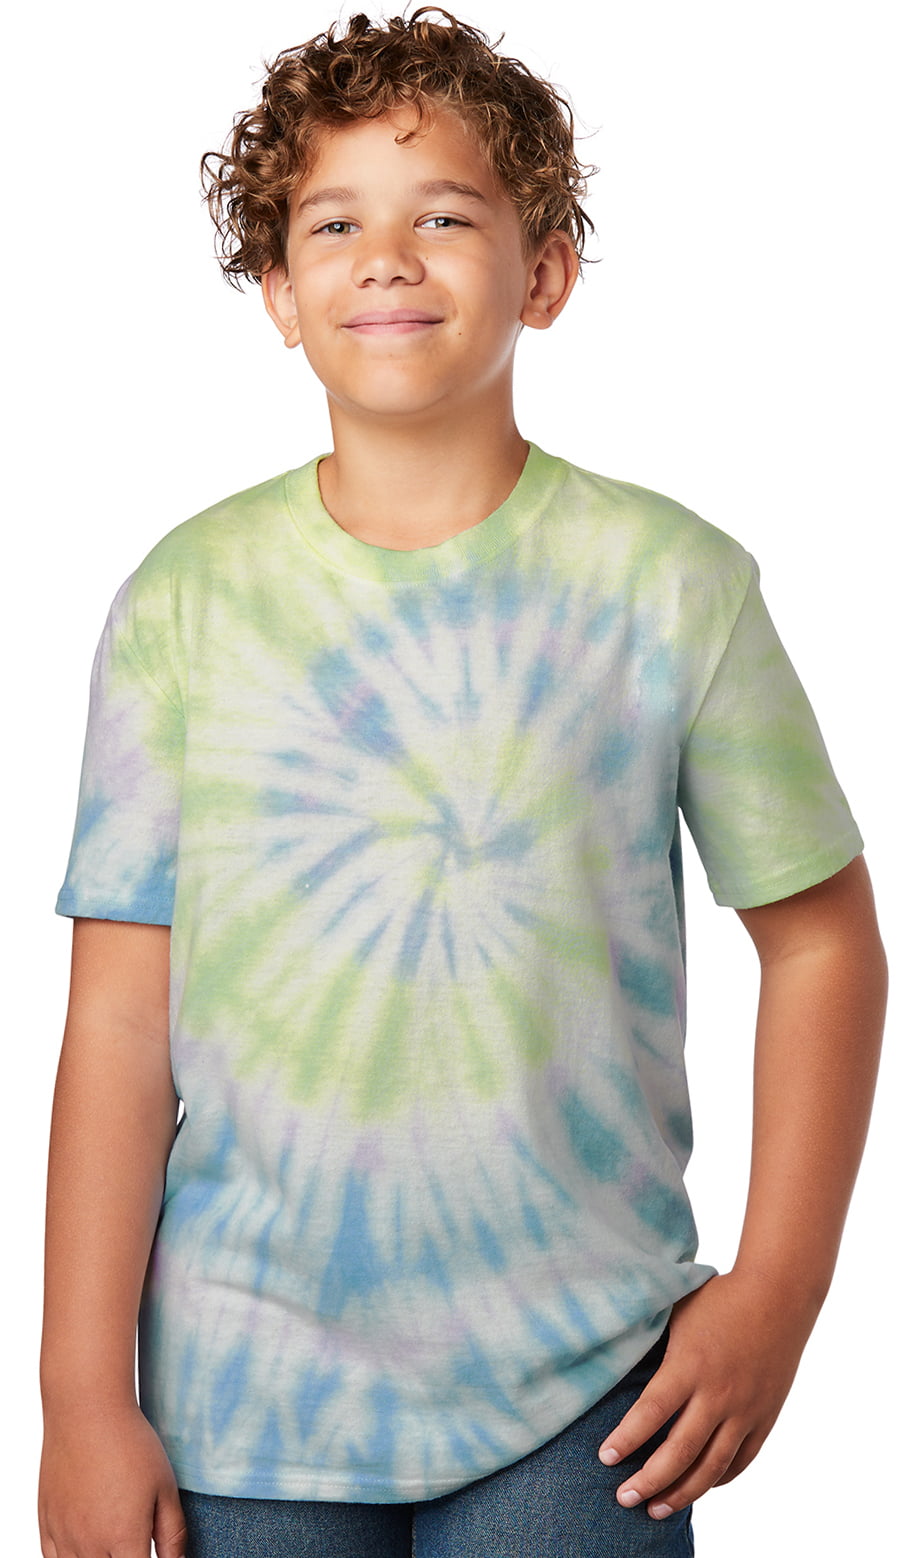 Tie Dye Tee Shirt for boys or girls ice dyed in green blue purple Child Size L